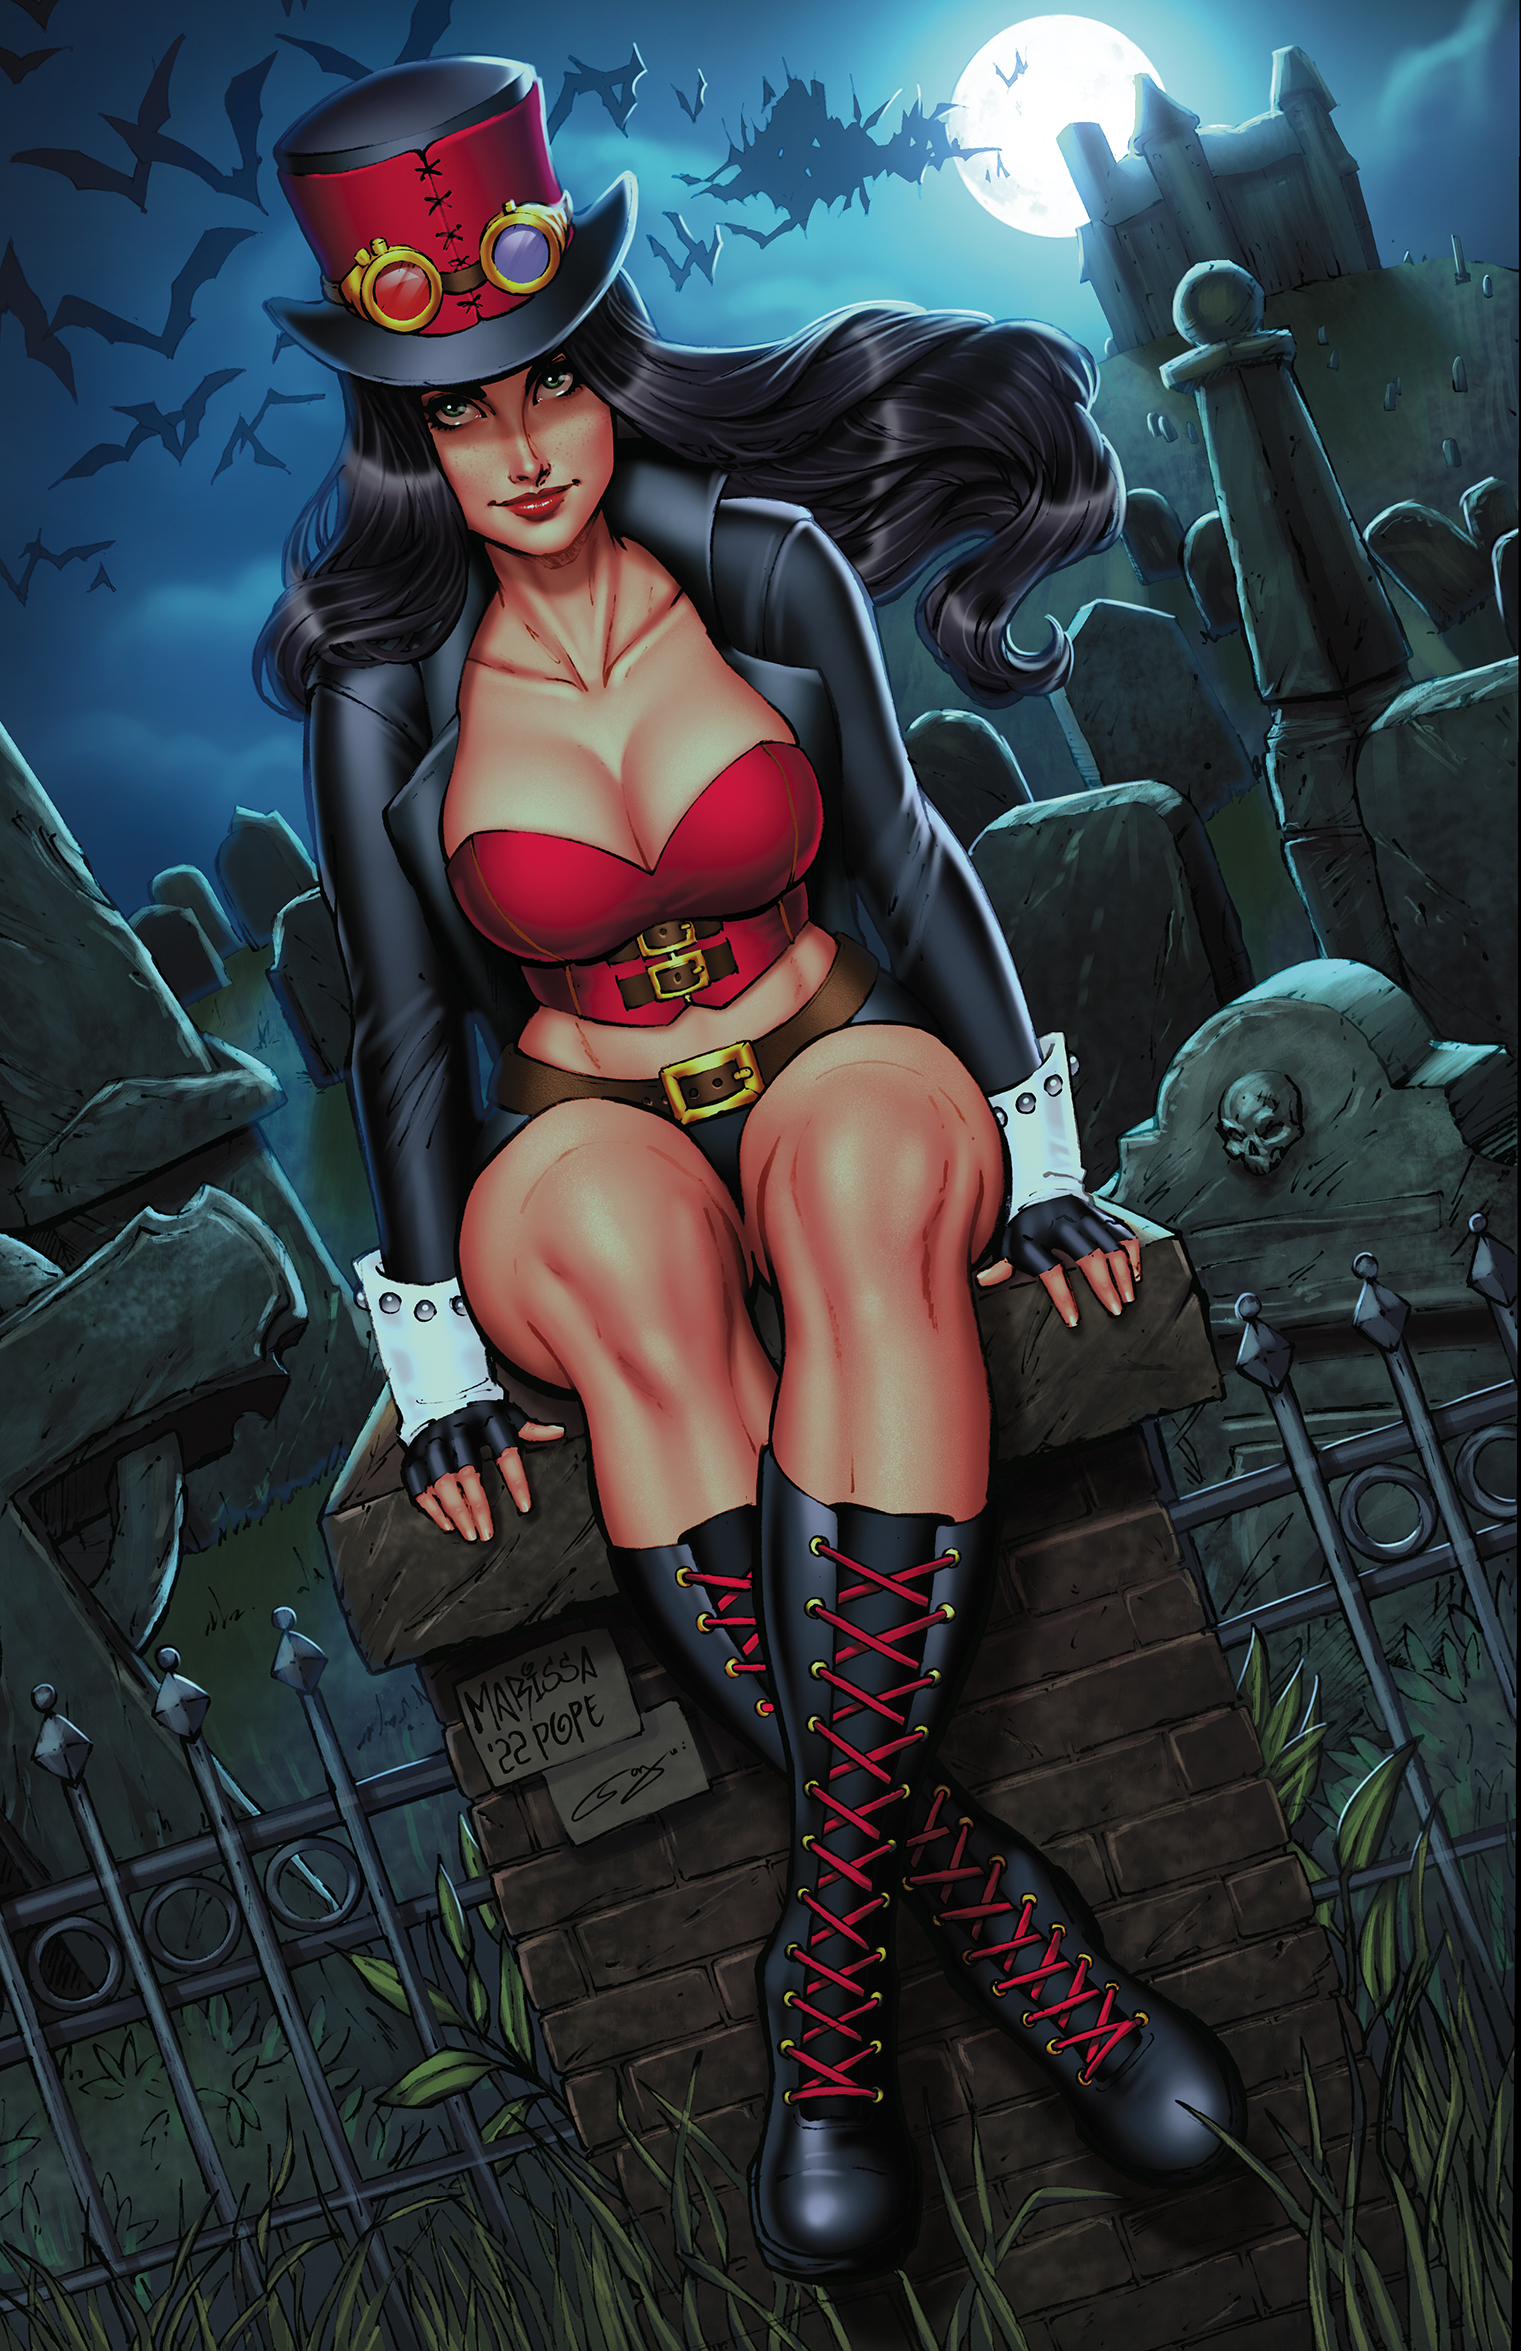 Van Helsing Annual Sins of the Father #3 Cover D Marissa Pope